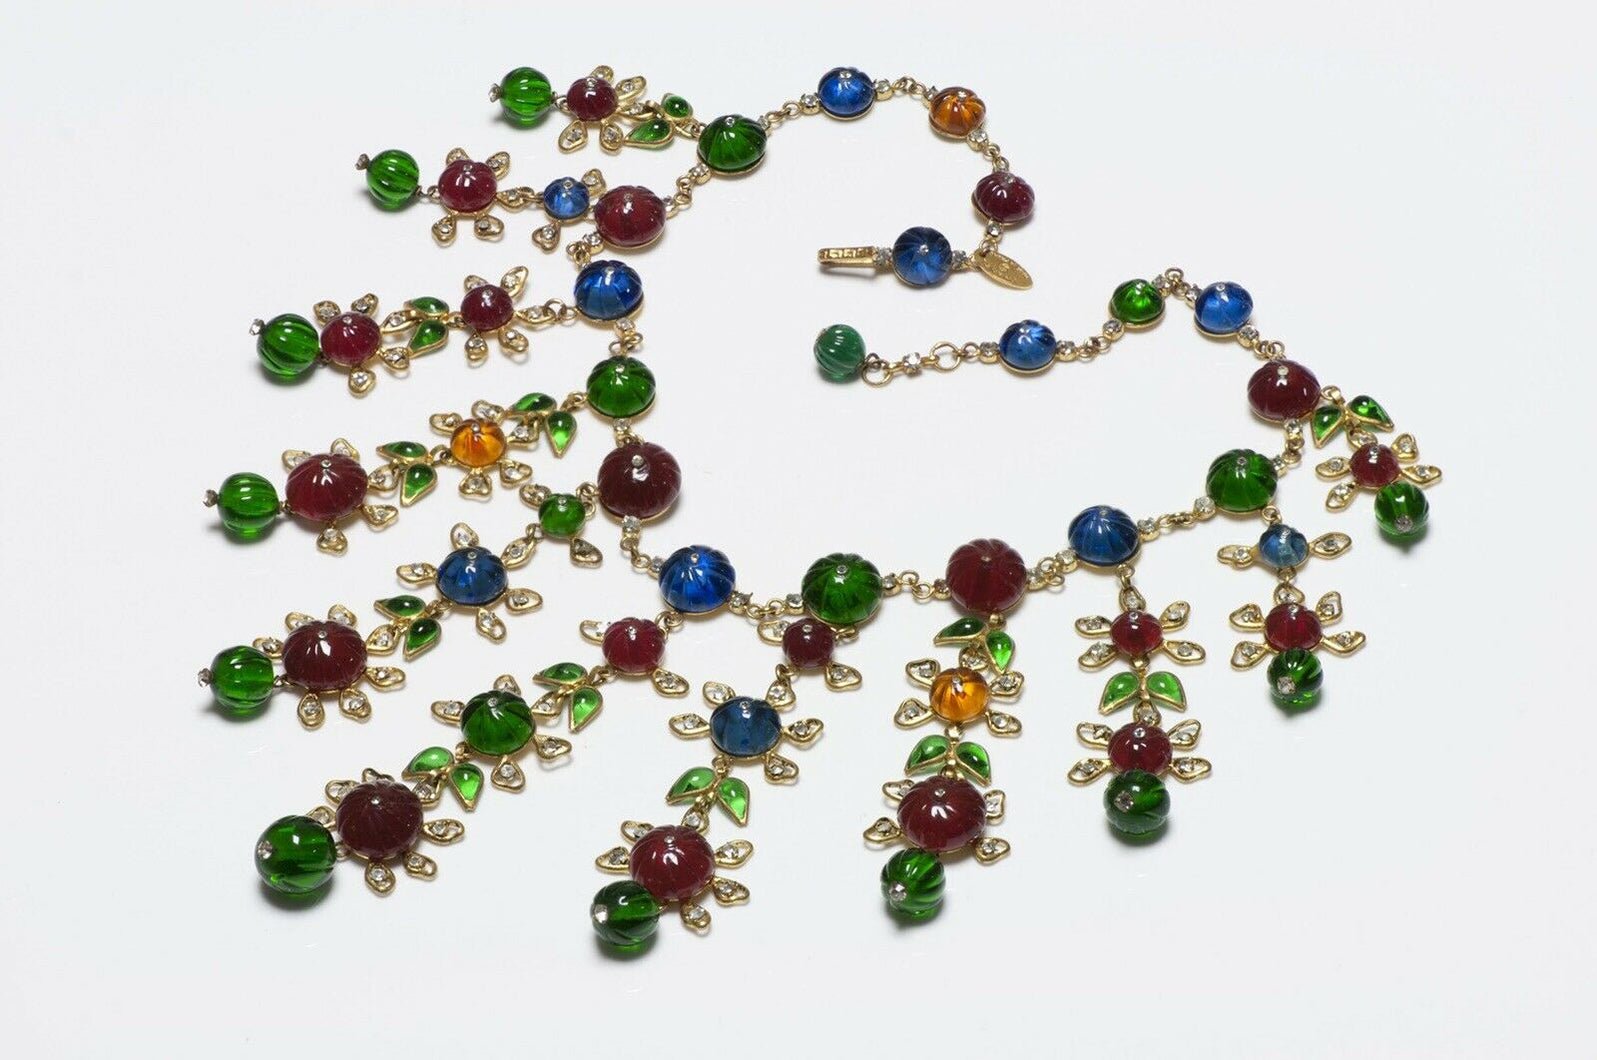 CHANEL 1990’s Couture Gripoix Camellia Green Red Blue Glass Necklace